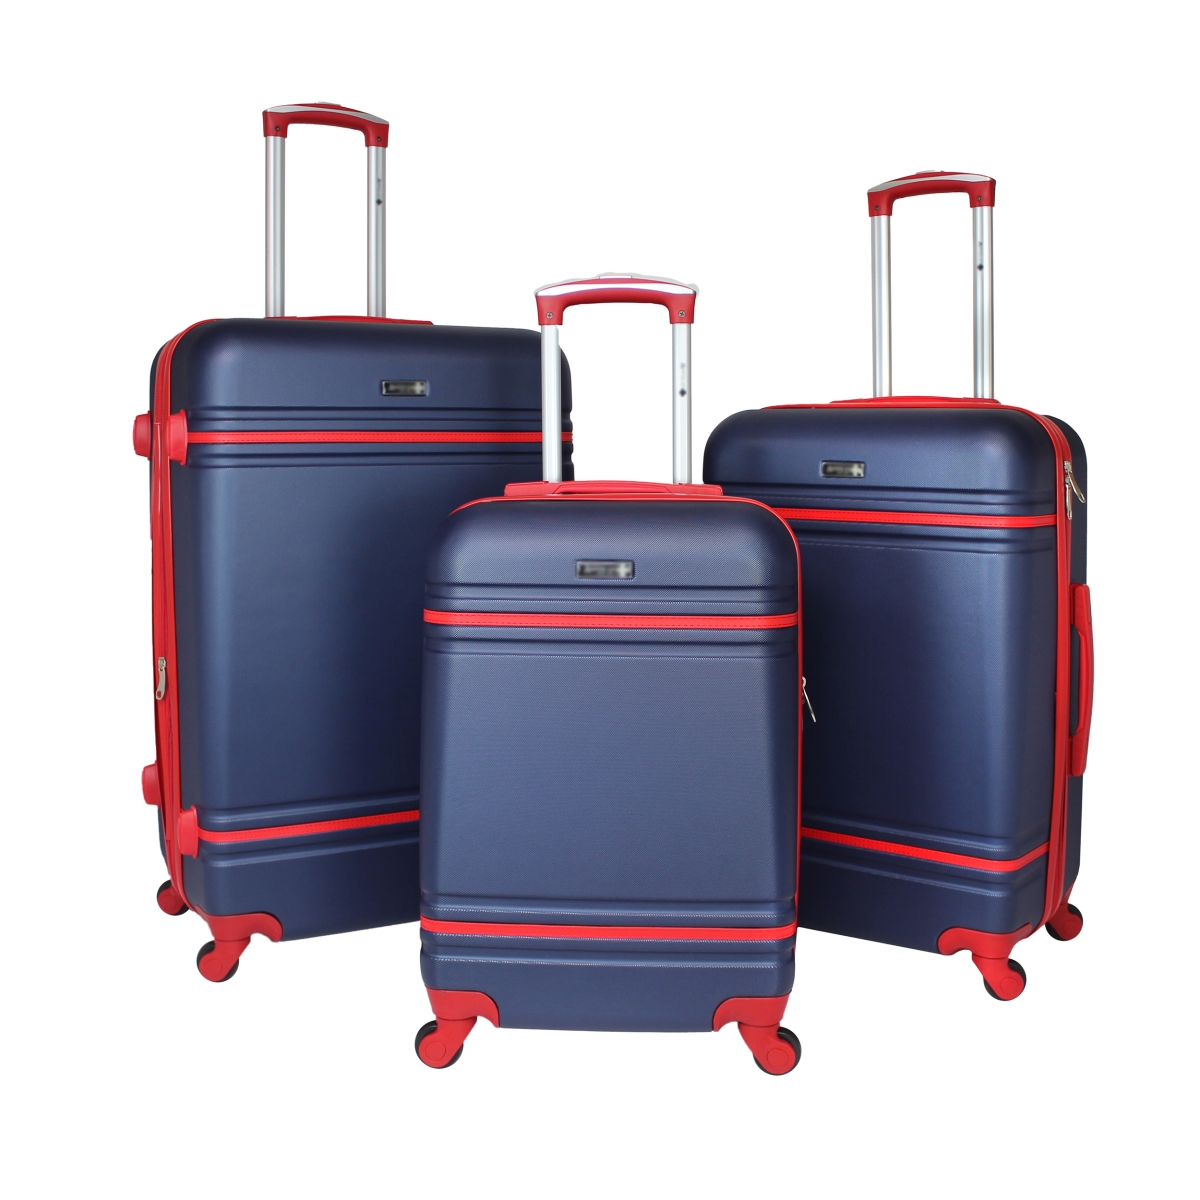 Wt86997-3e-nvy-red 3 Piece American Collection Spinner Luggage Set - Navy & Red